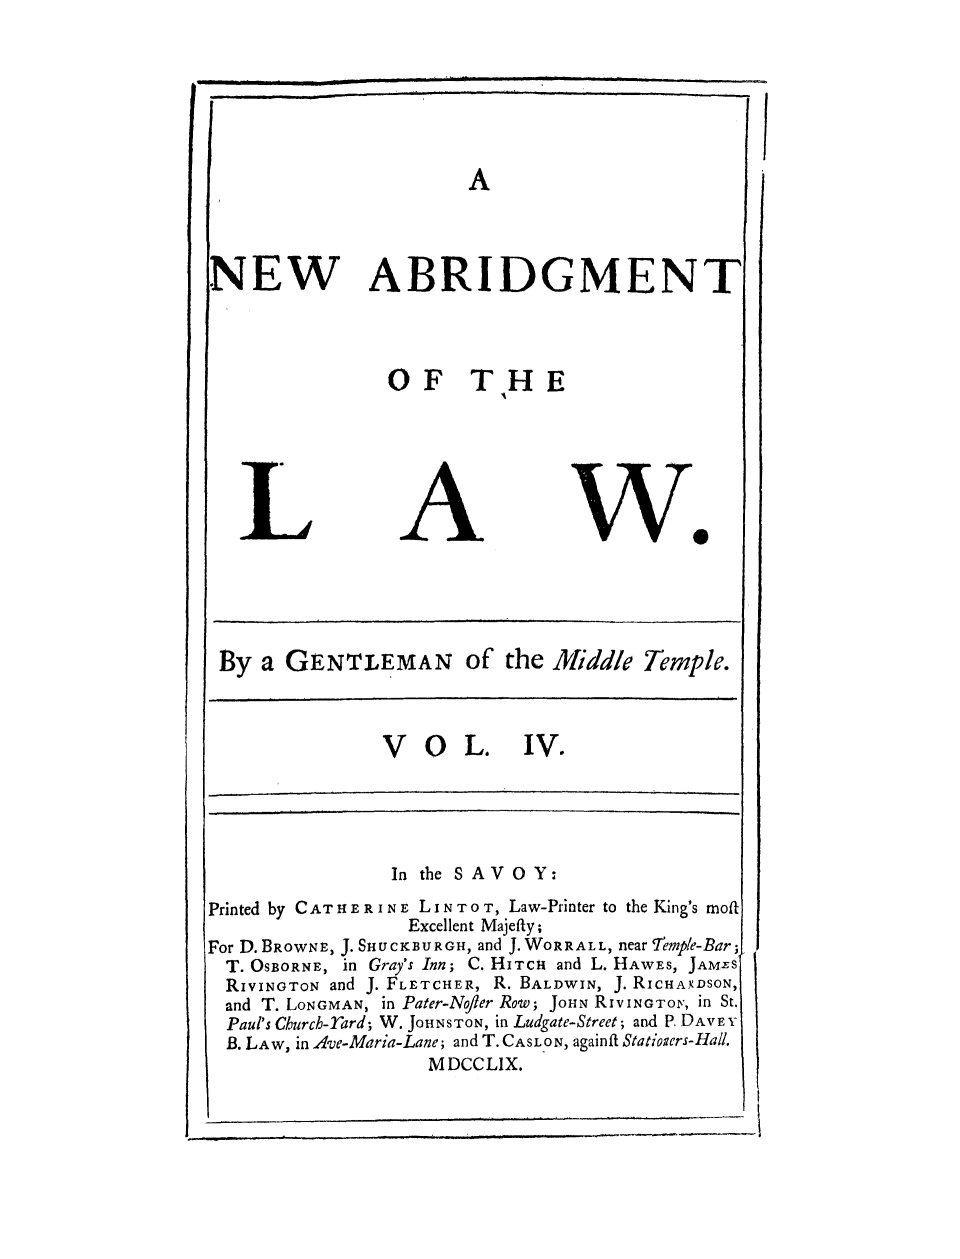 handle is hein.selden/gemitem0004 and id is 1 raw text is: ! I  |  _ I  1 . . . . . . .   iI!

NEW

ABRIDGMENT
OF THE

wo

By a GENTLEMAN of the Middle Temple.
VOL. IV.
In the SAVOY:
Printed by CAT HERINE LINTOT, Law-Printer to the King's moit
Excellent Majefty;
For D. BROwNE, J. SHUCKBURGH, and J. WORRALL, near Temple-Bar;
T. OSBORNE, in Gray's Inn; C. HITCh and L. HAWES, JAMES
RiVINGToN and J. FLETCHER, R. BALDWIN, J. RiCHAXDSON,
and T. LONGMAN, in Pater-Nofler Row; JOHN RiVINGTO,, in St.
Paul's Church-Tard; W. JOHNSTON, in Ludgate-Street; and P. DAVEY
B. LAW, in Ave-Maria-Lane; and T. CASL ON, againft Statioicrs-Hall.
M DCCL1X.


